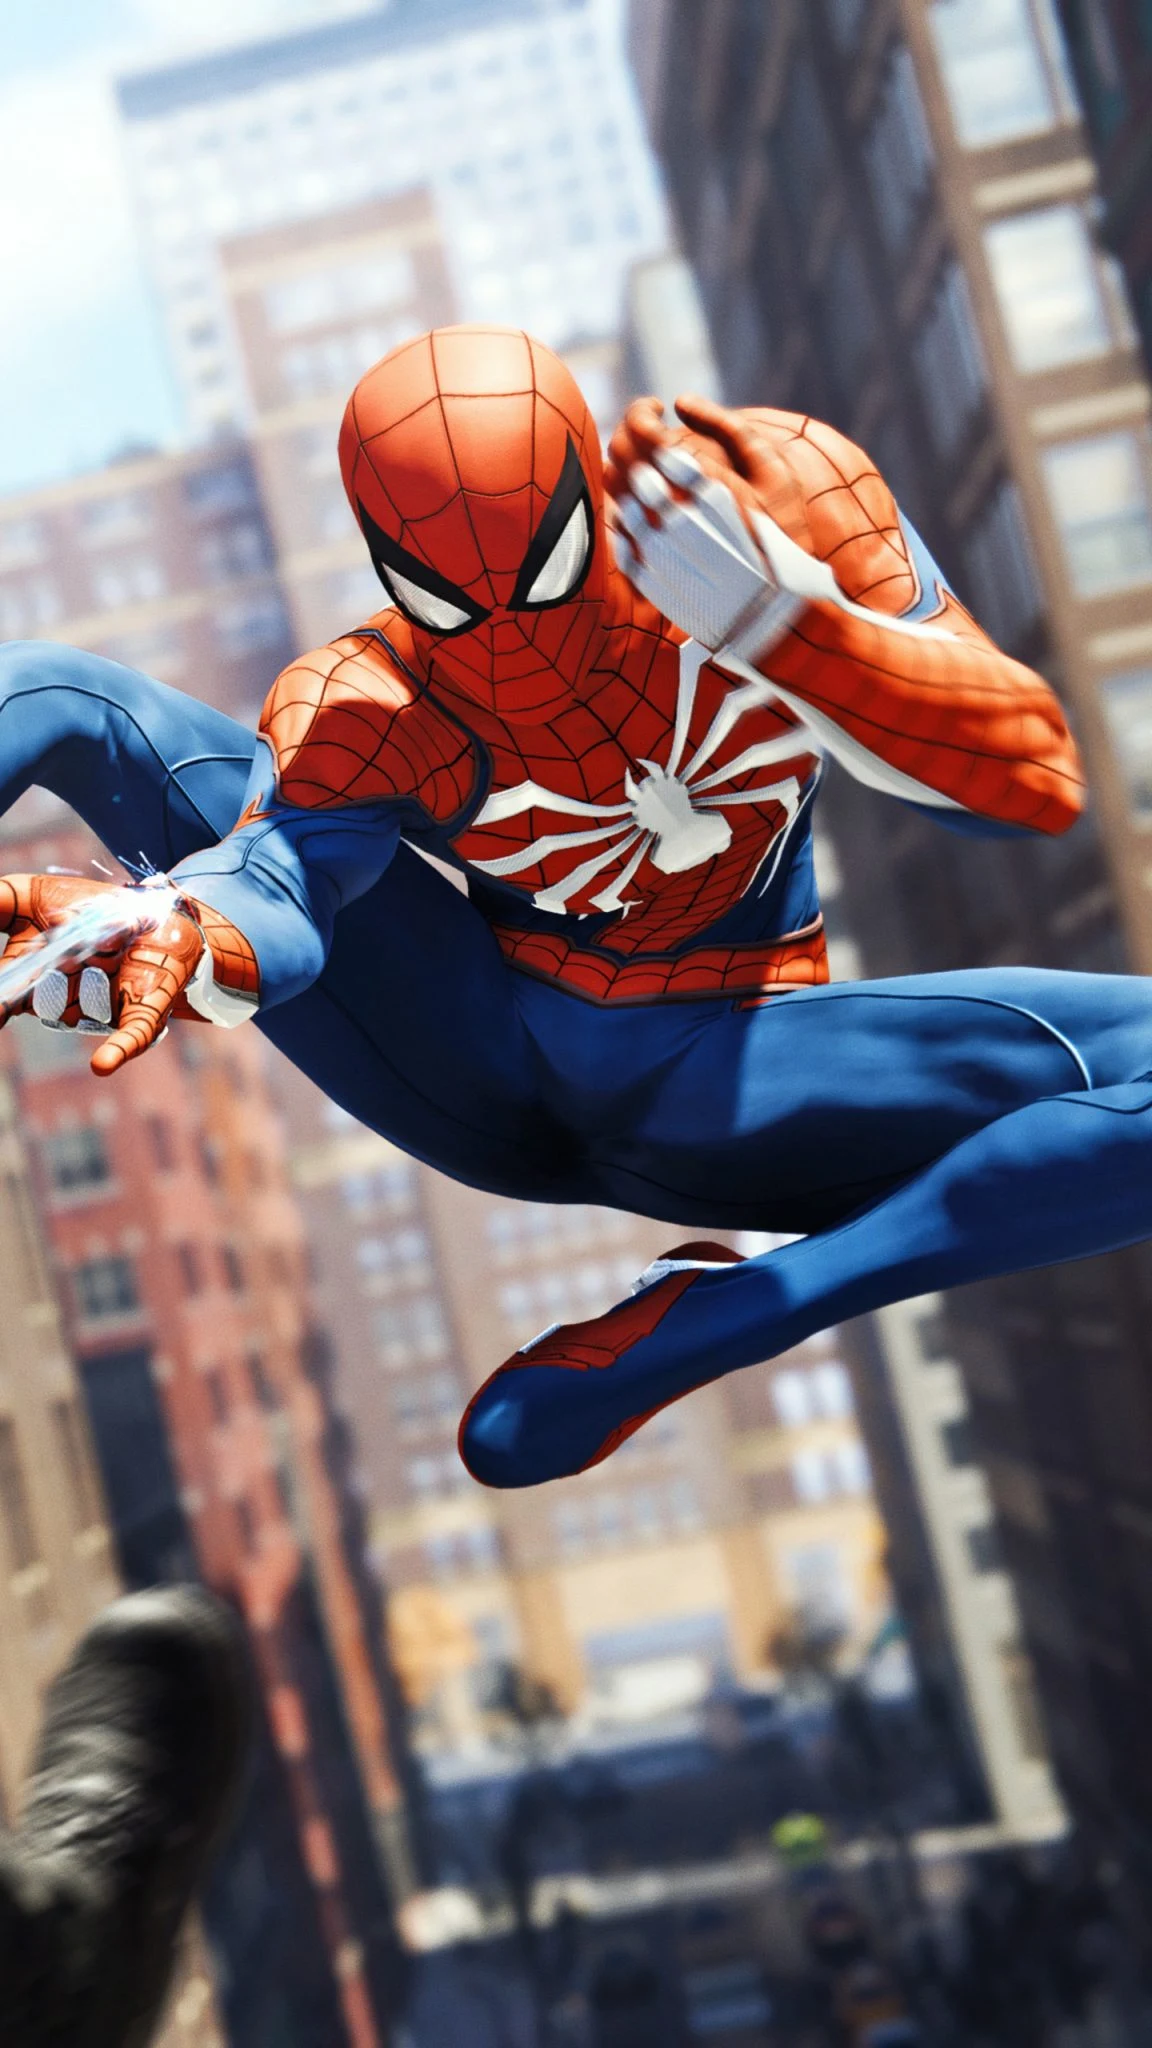 7 Spiderman HD Wallpapers, for iPhone Mobile Wallpaper 2021